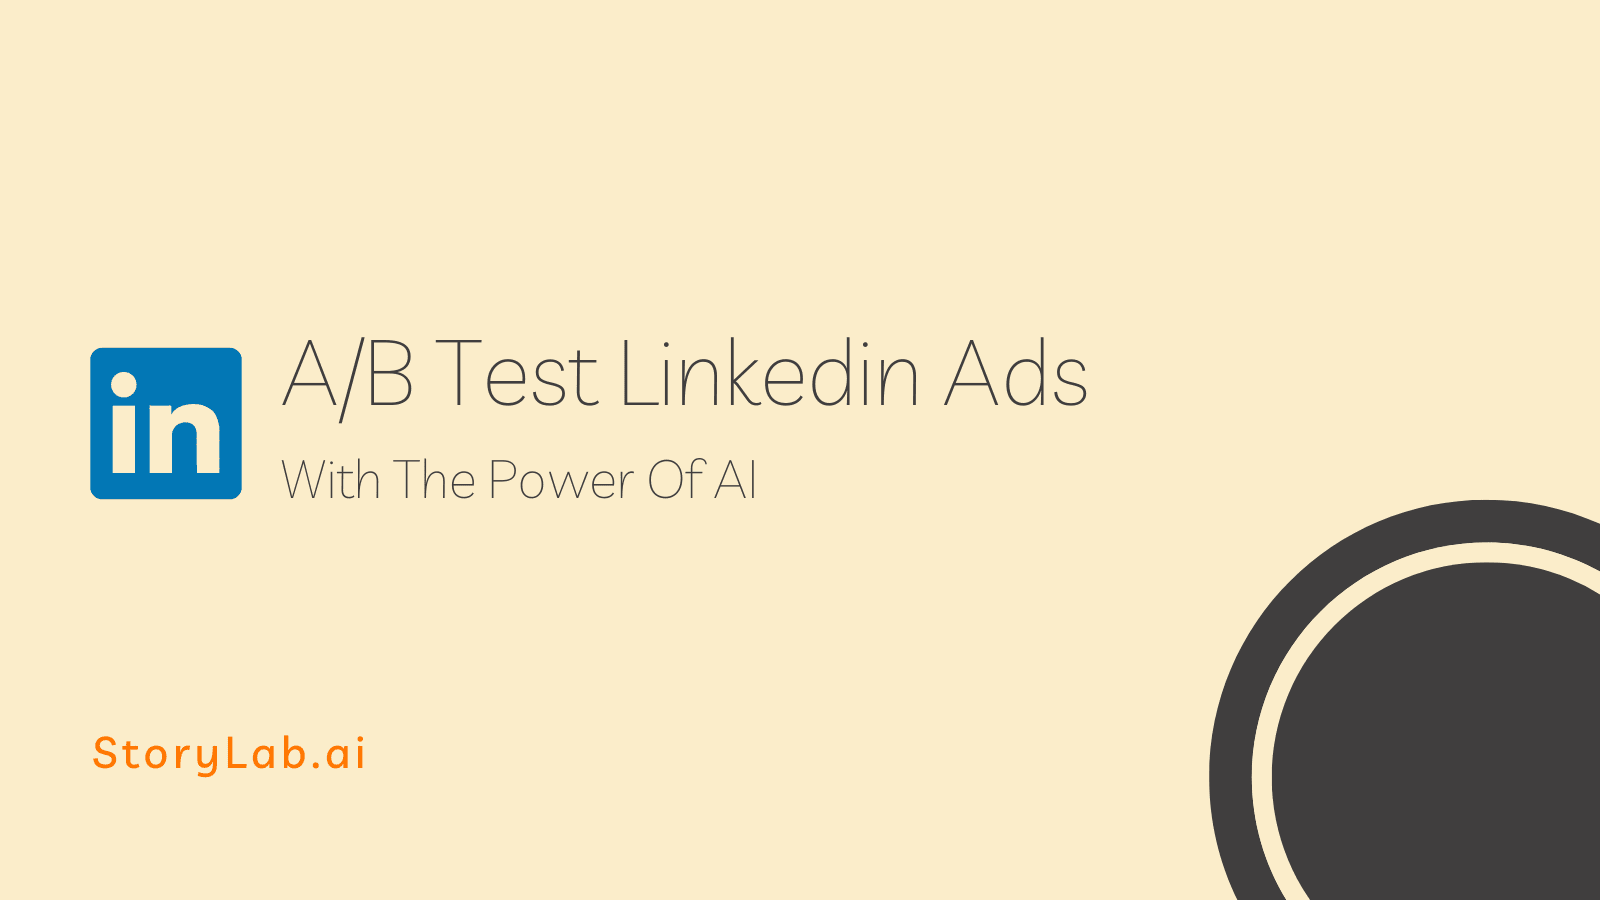 A/B Test Linkedin Ads With Artificial Intelligence (AI)